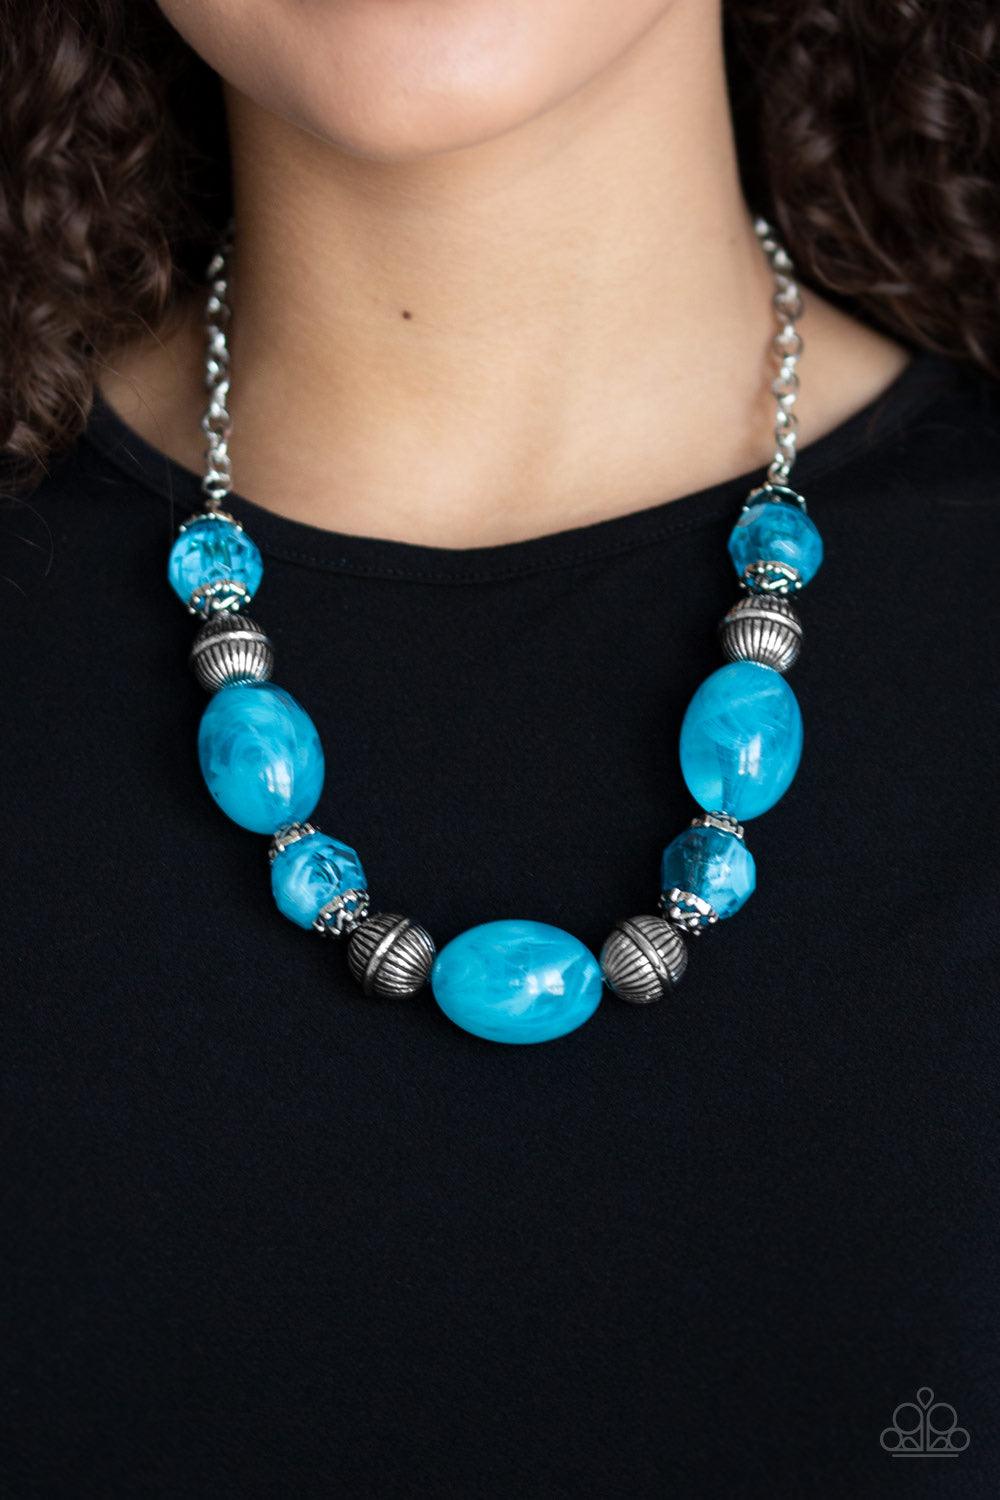 Paparazzi Accessories Ice Melt - Blue Featuring an array of antiqued silver beads, an icy collection of oversized glassy blue beads are threaded along an invisible wire below the collar for a colorful, statement making look. Features an adjustable clasp c